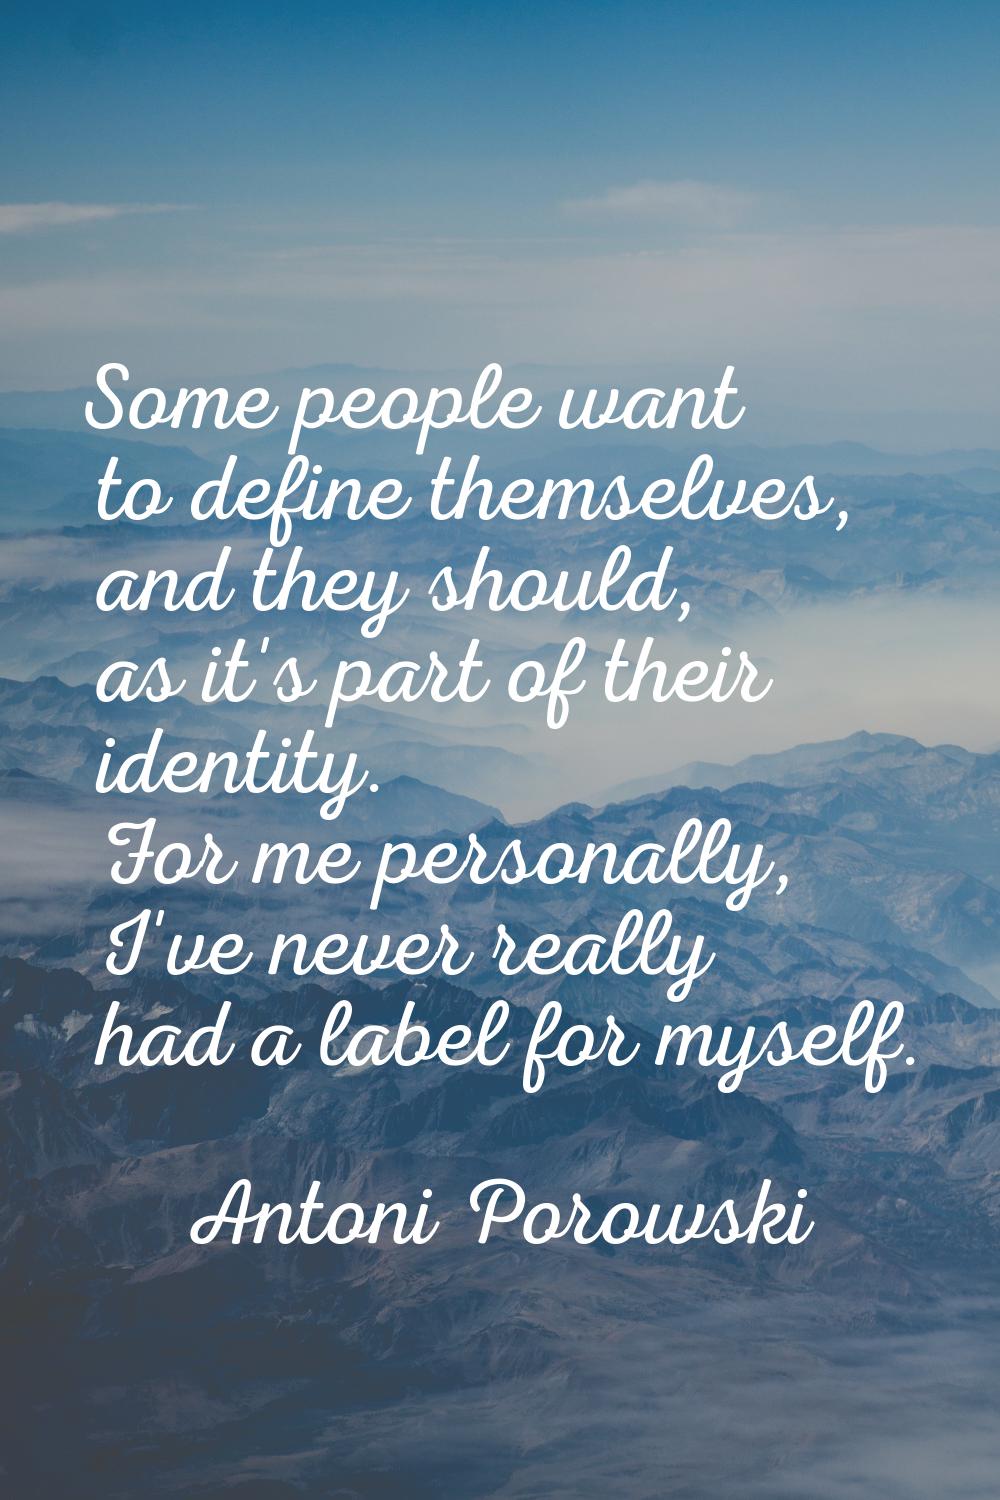 Some people want to define themselves, and they should, as it's part of their identity. For me pers